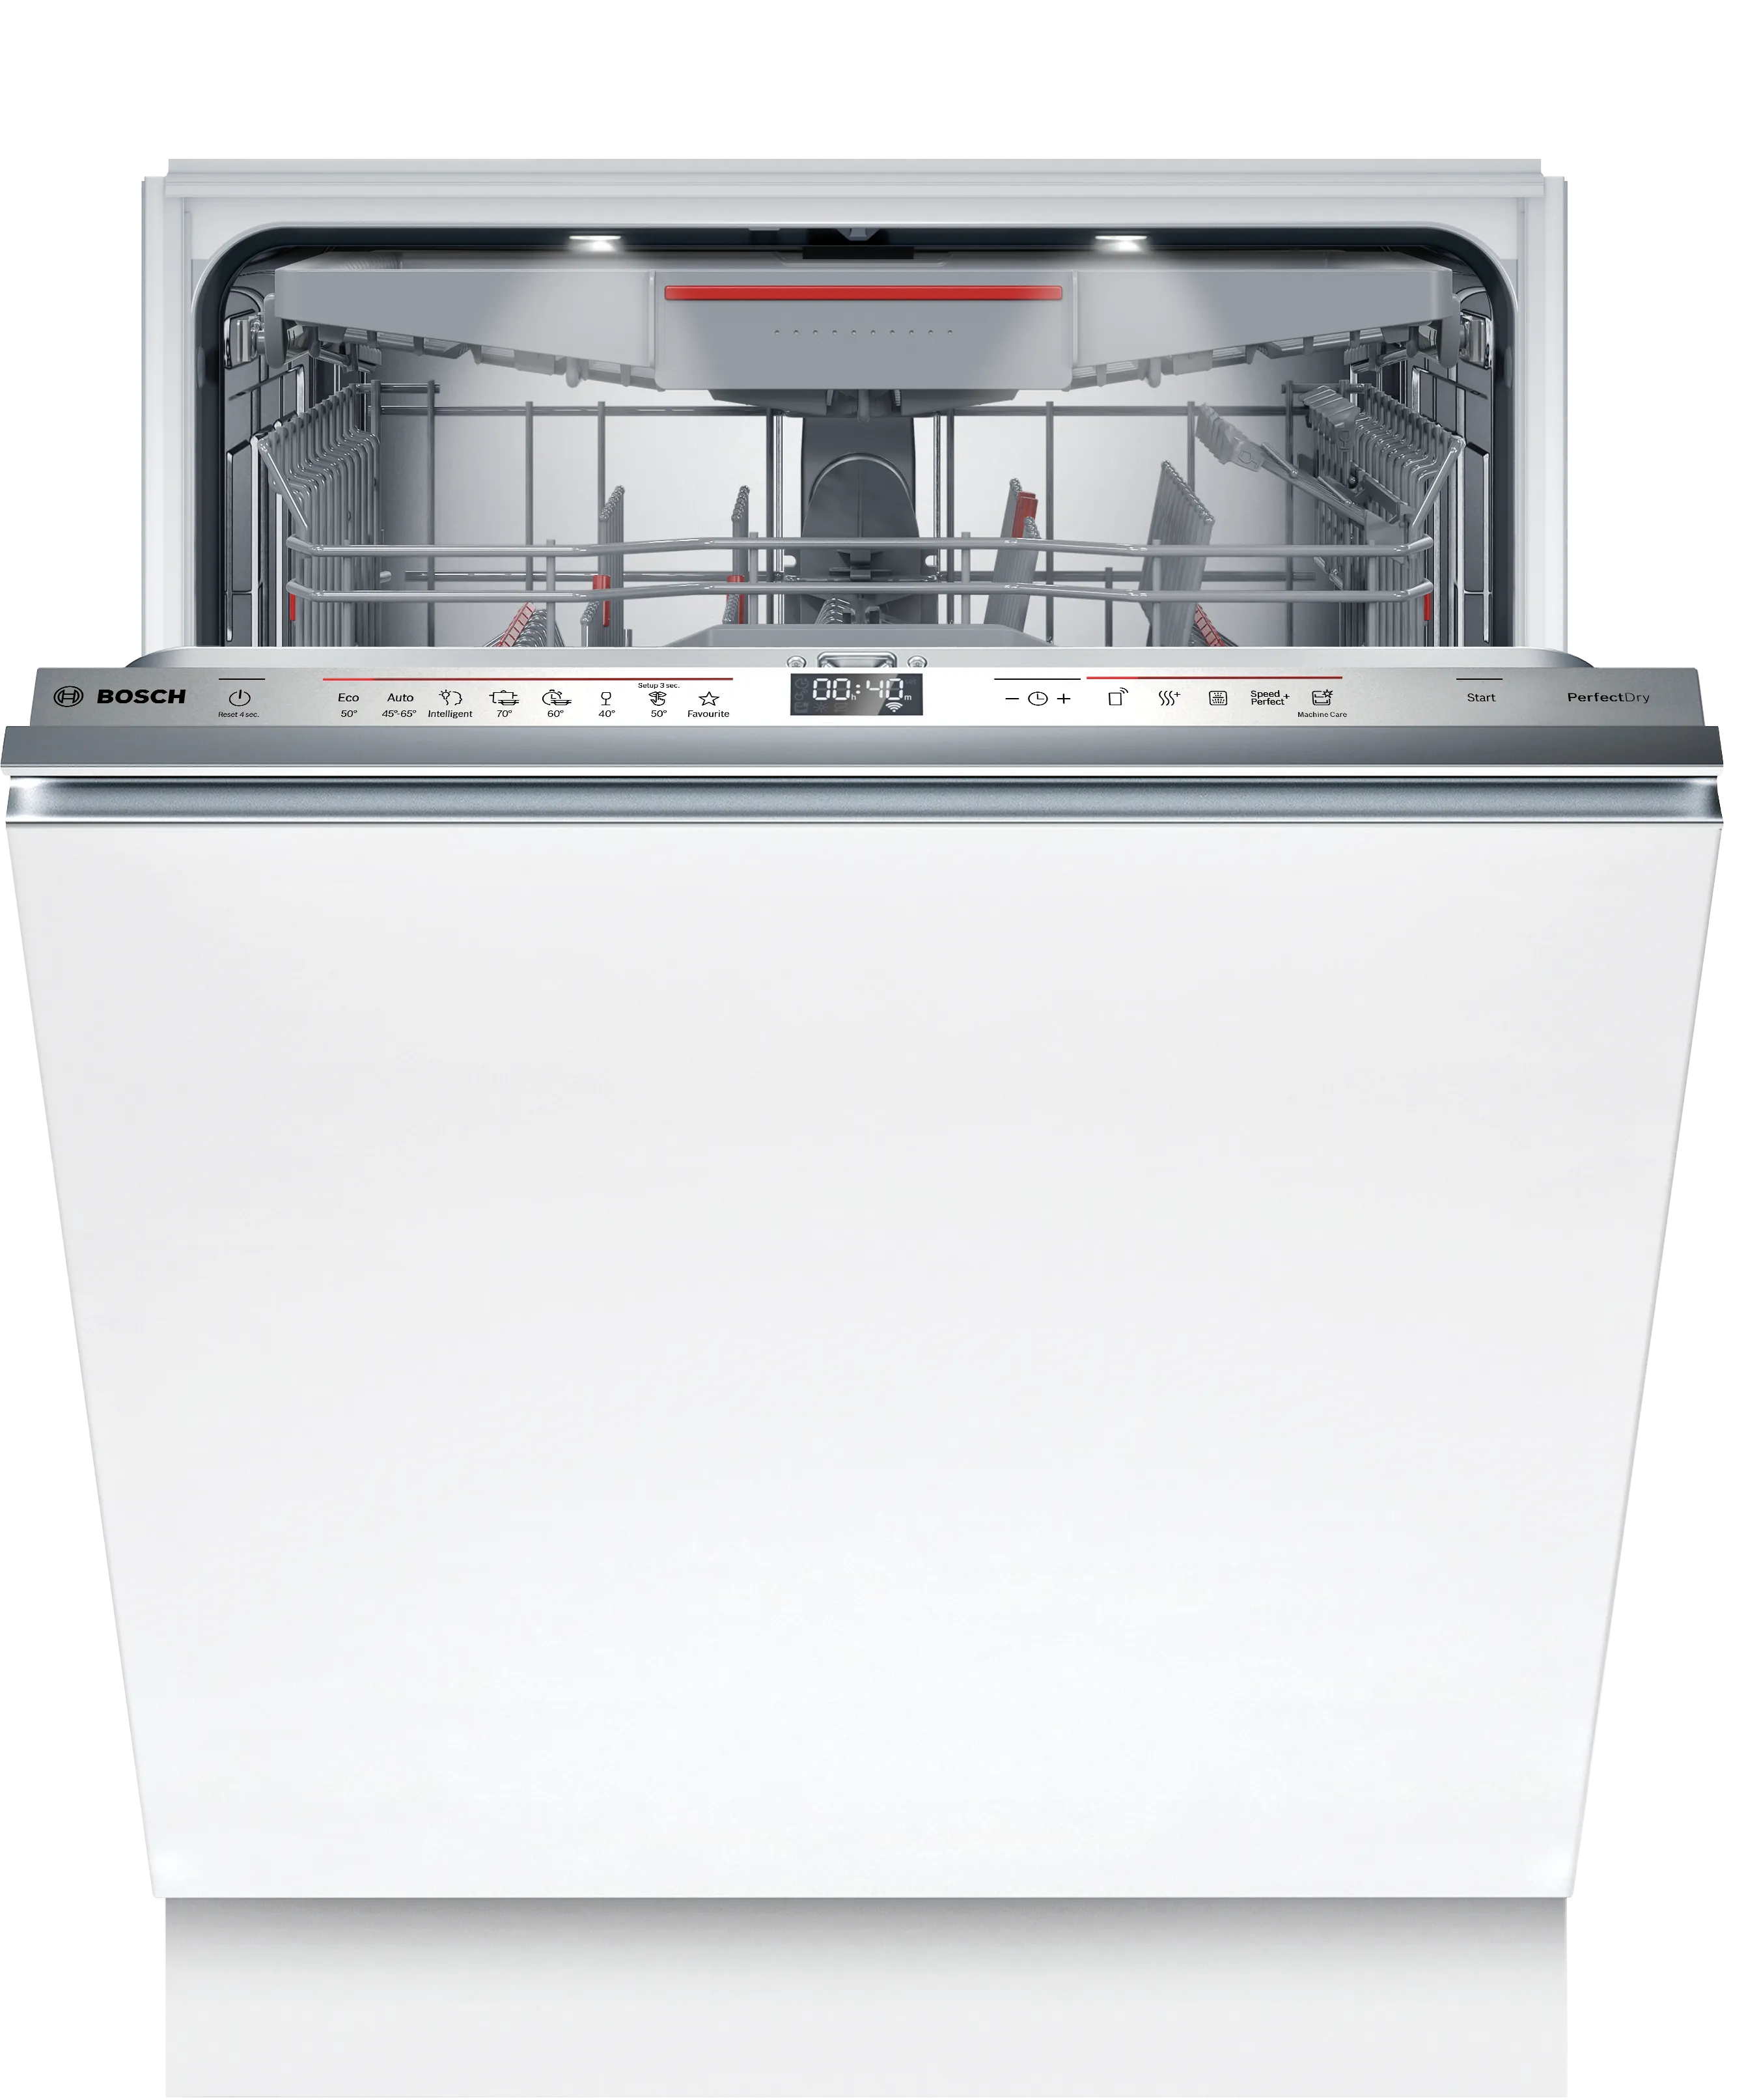 Series 6 fully-integrated dishwasher 60 cm Variable hinge for special installation situations 